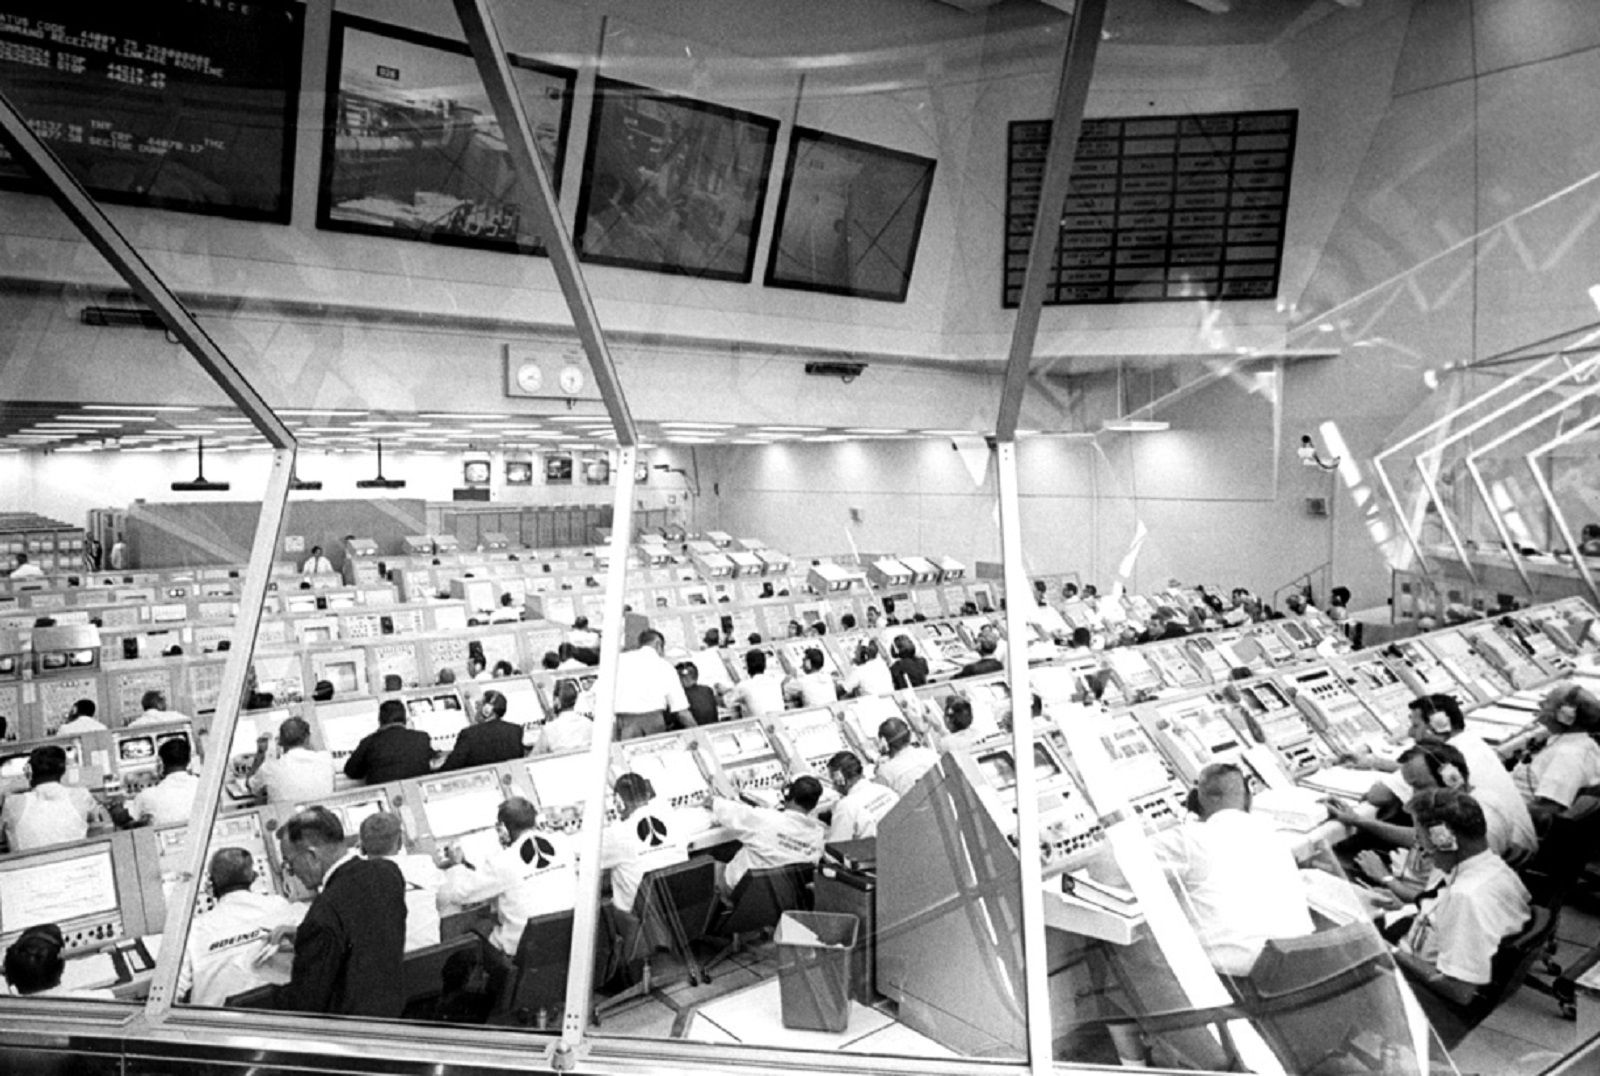 Satisfying Photos Of Classic Control Rooms That Once Ran The World image 4